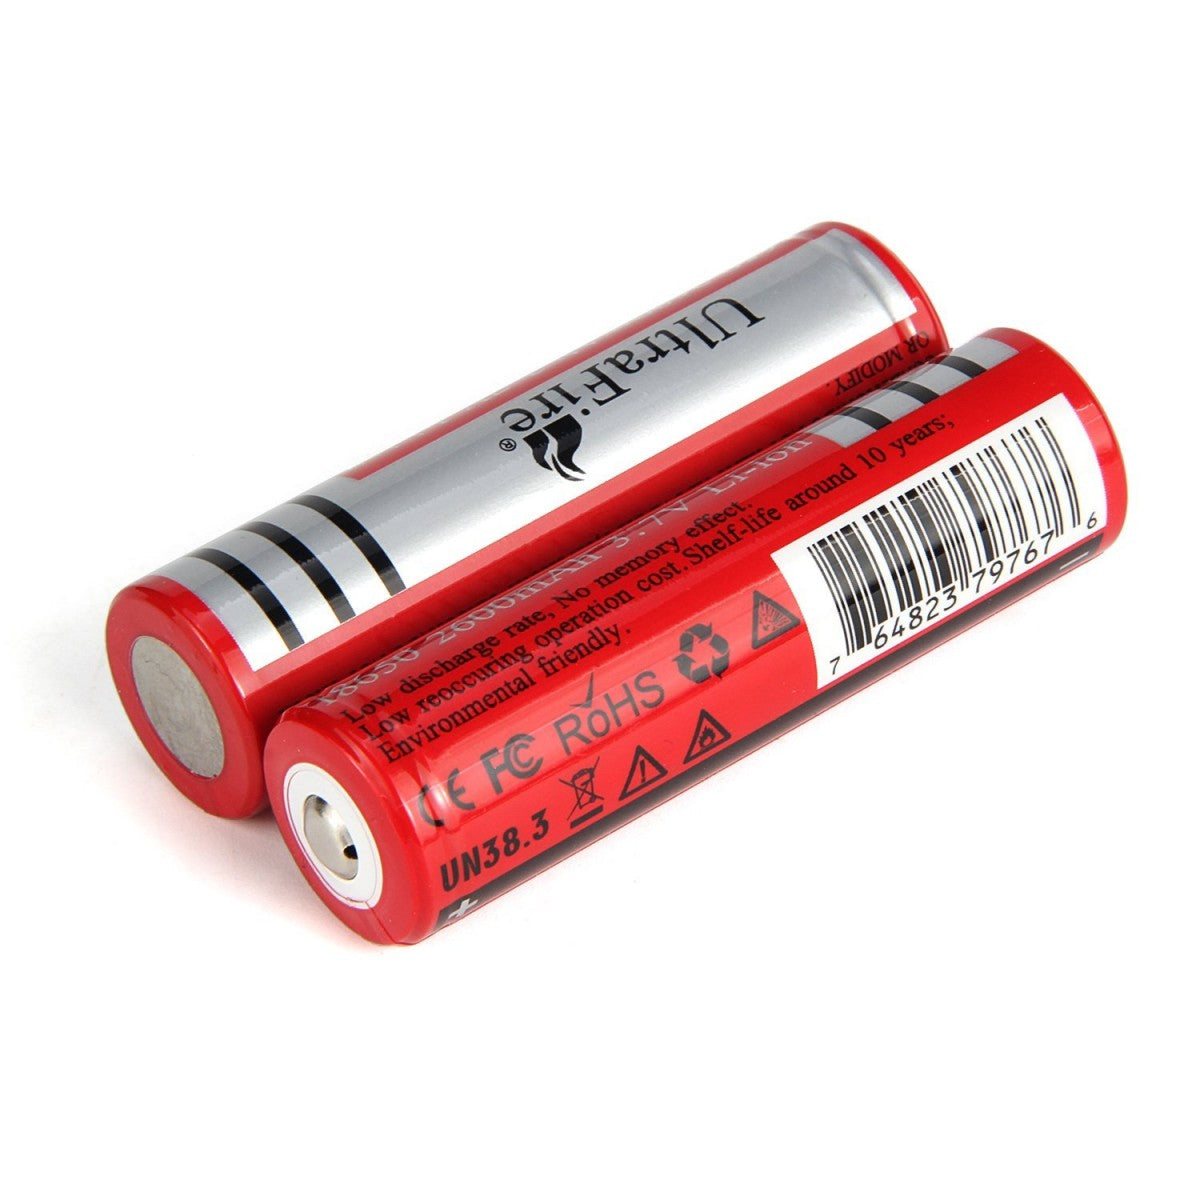 UltraFire 2600mAh 3.7V 18650 Li-ion Rechargeable Battery Without Prote